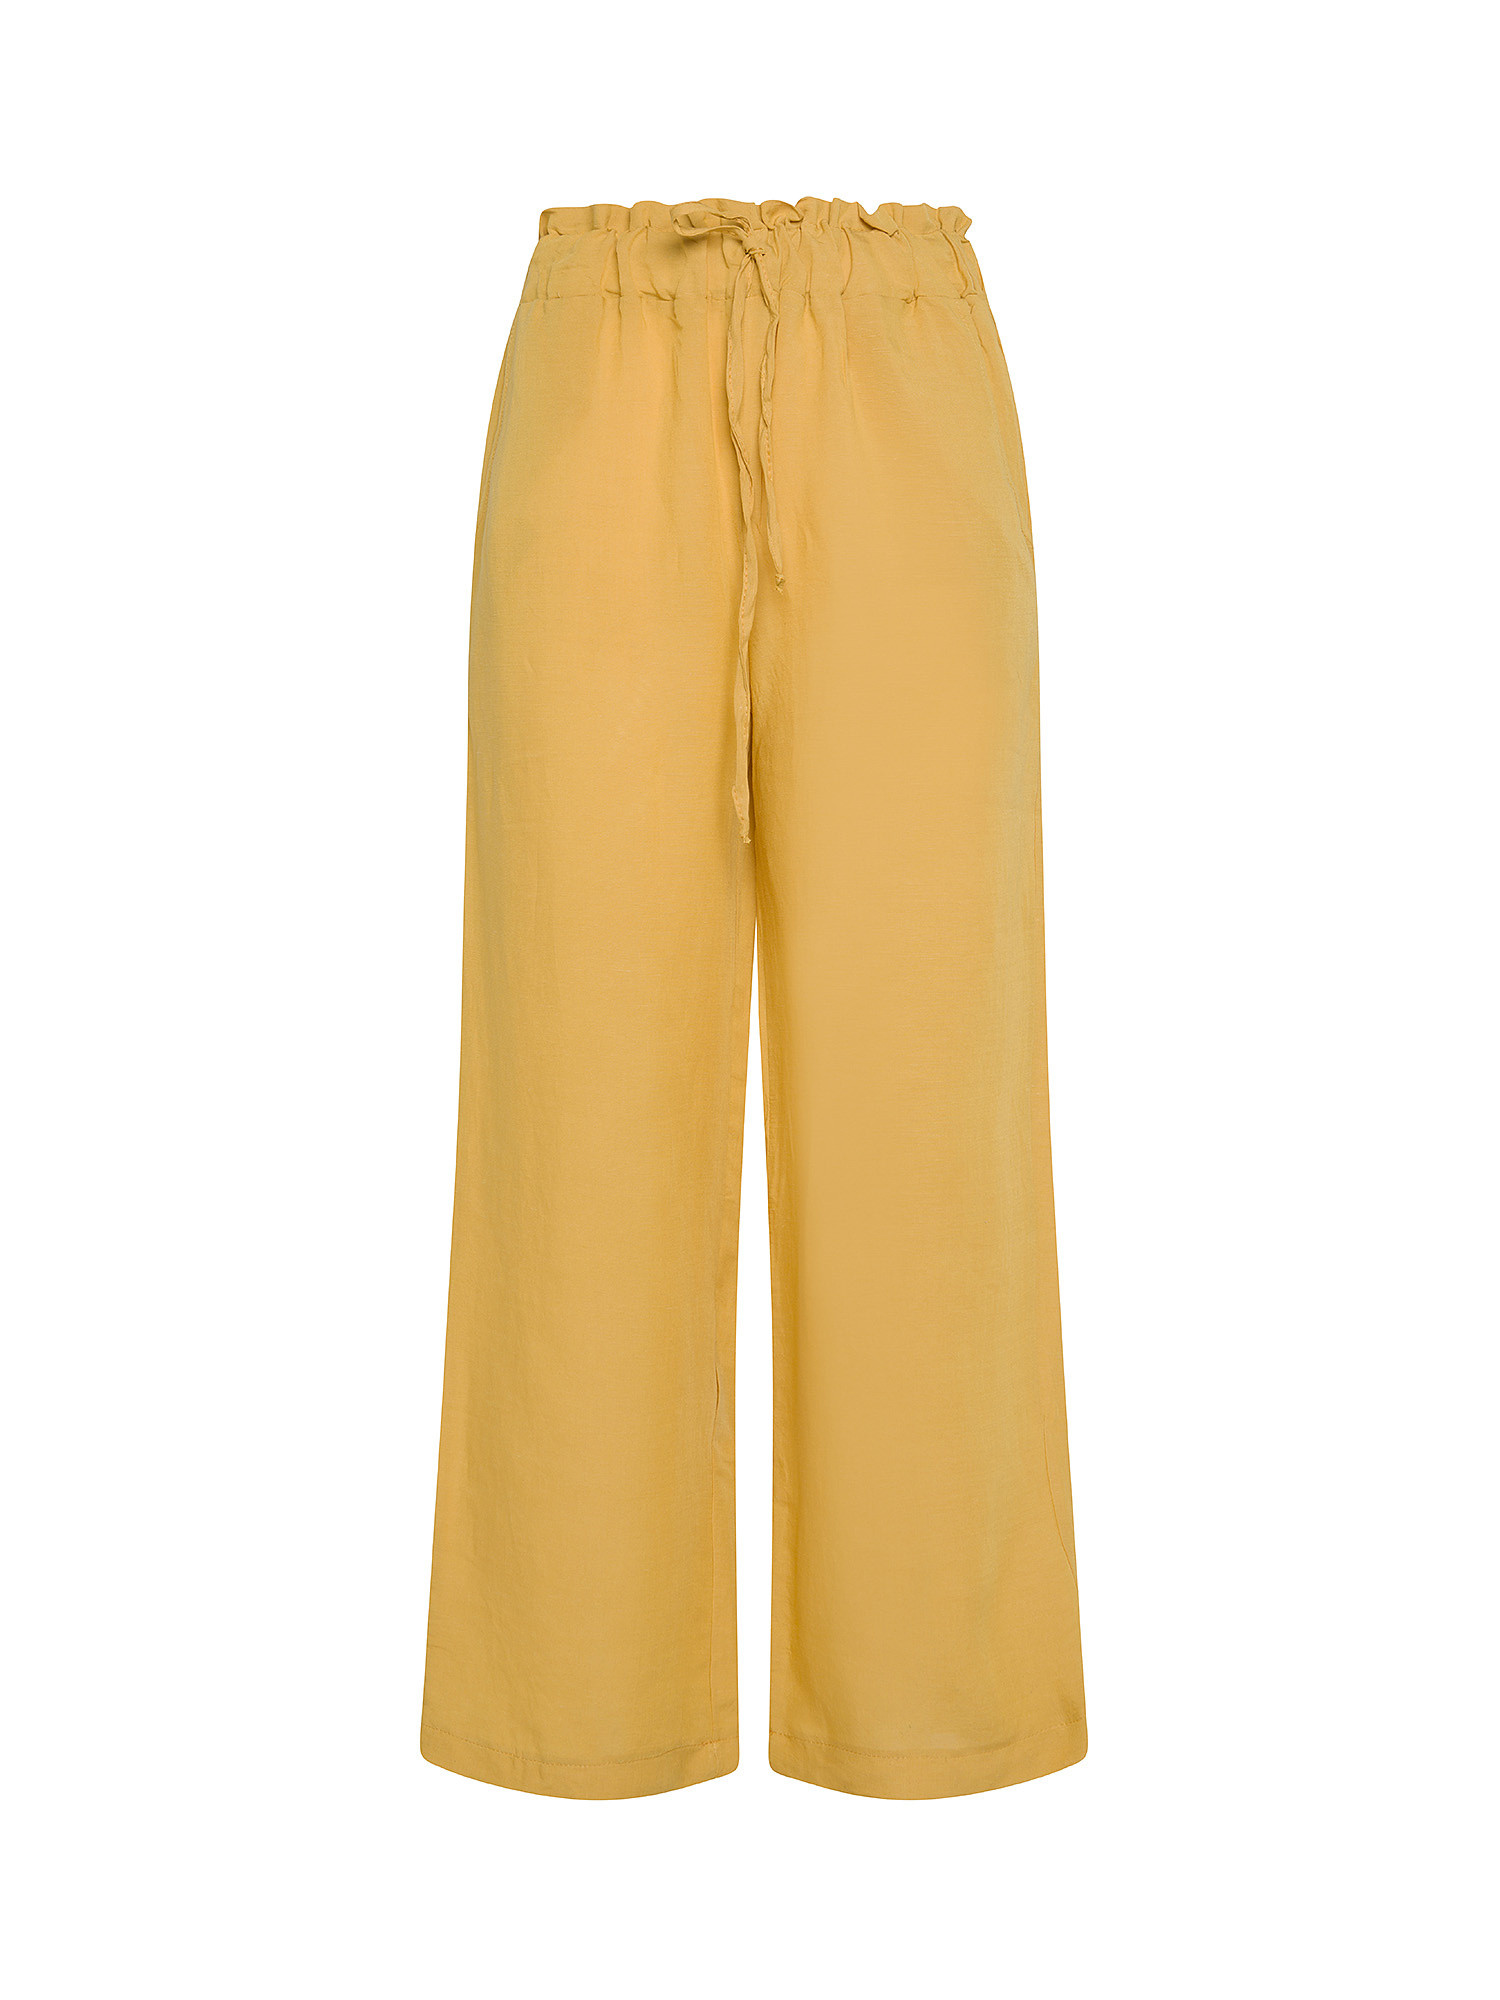 Solid color linen and viscose trousers, Ocra Yellow, large image number 0